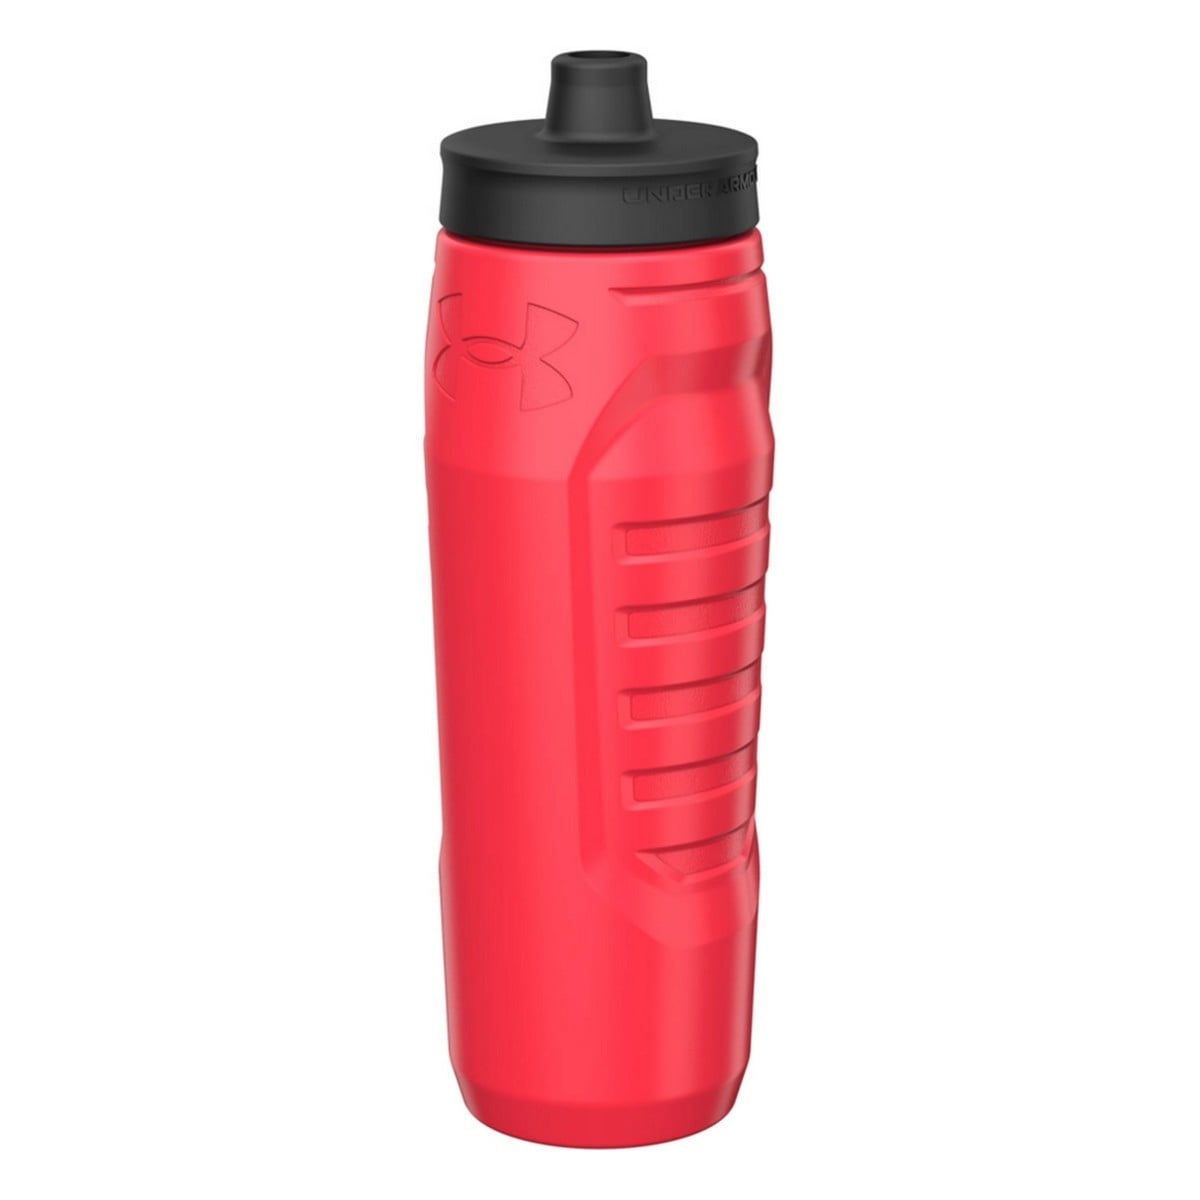 Under Armour Sideline 32 Ounce Squeezable Bottle, Black